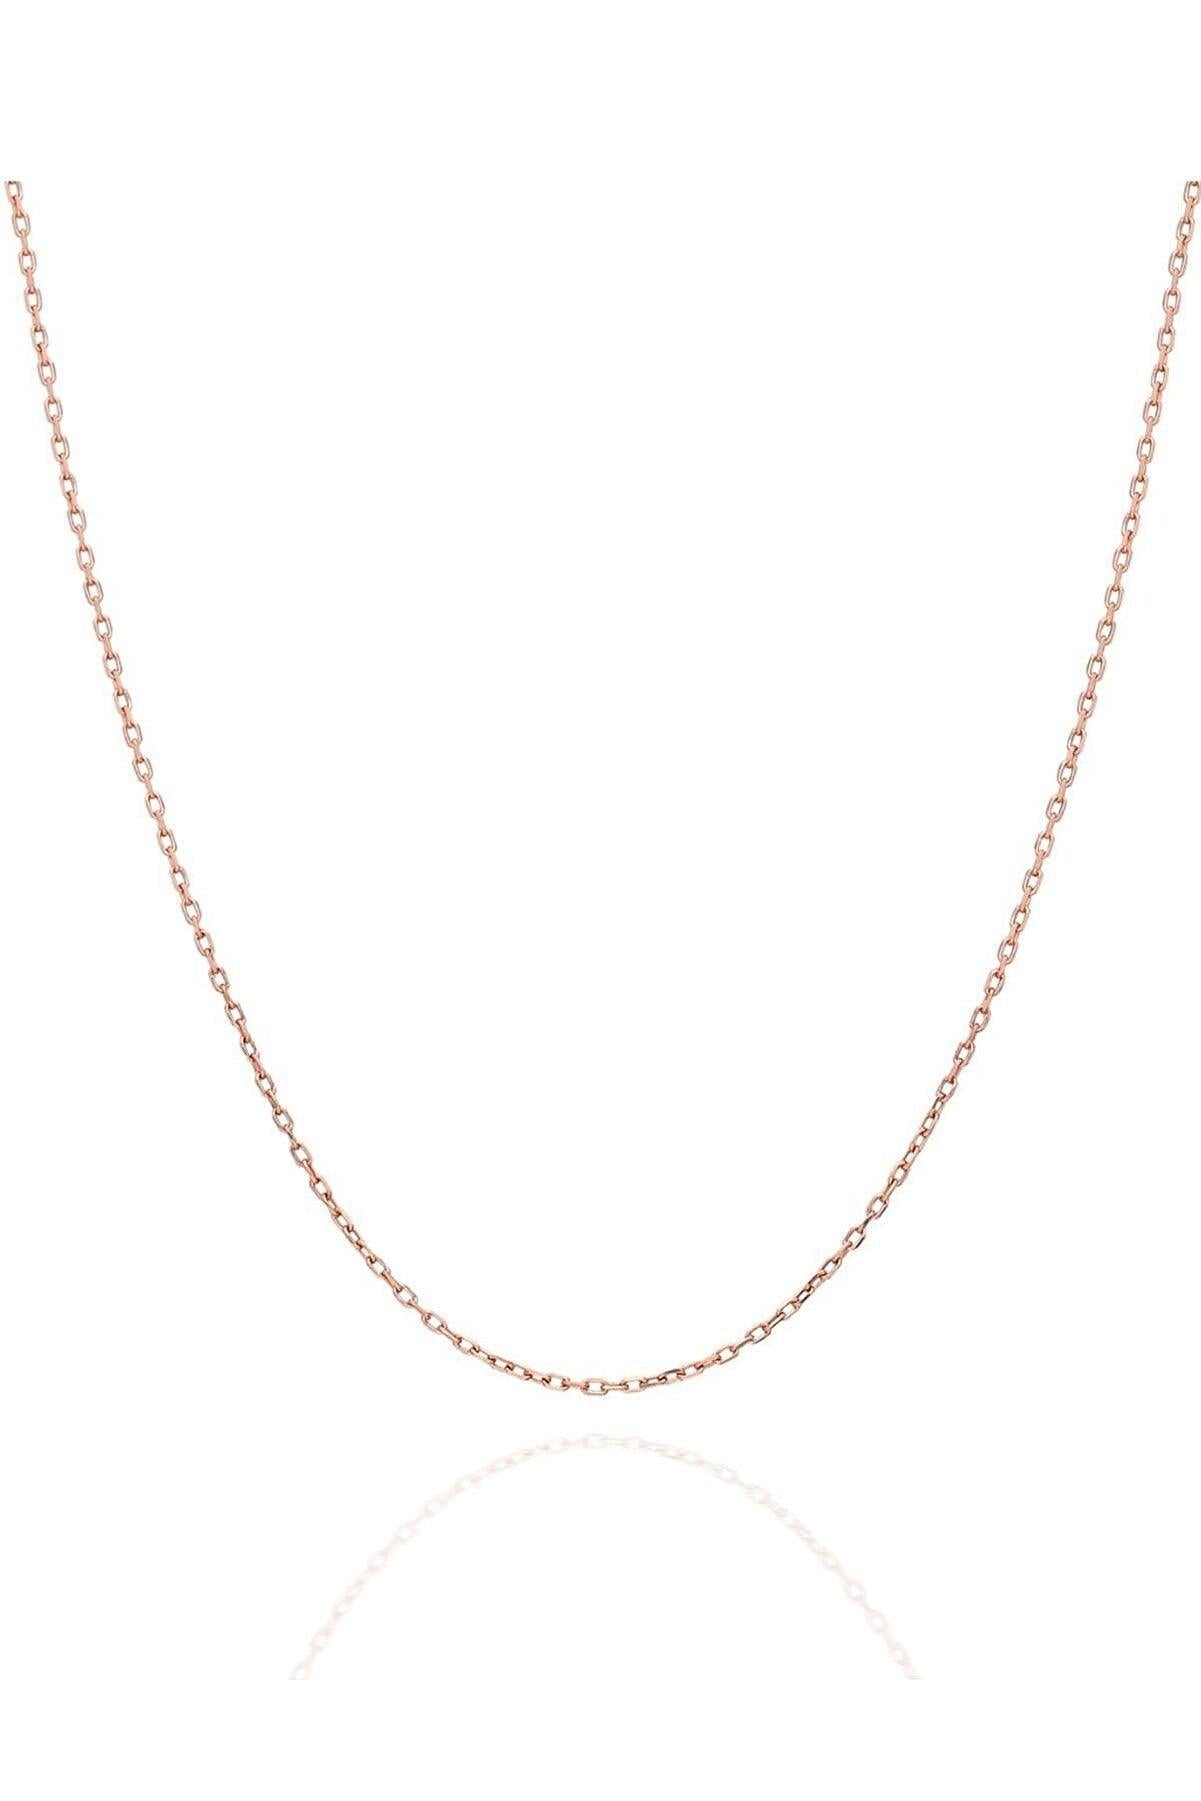 Spero London Women's Curb Chain Necklace Sterling Silver - Rose Gold